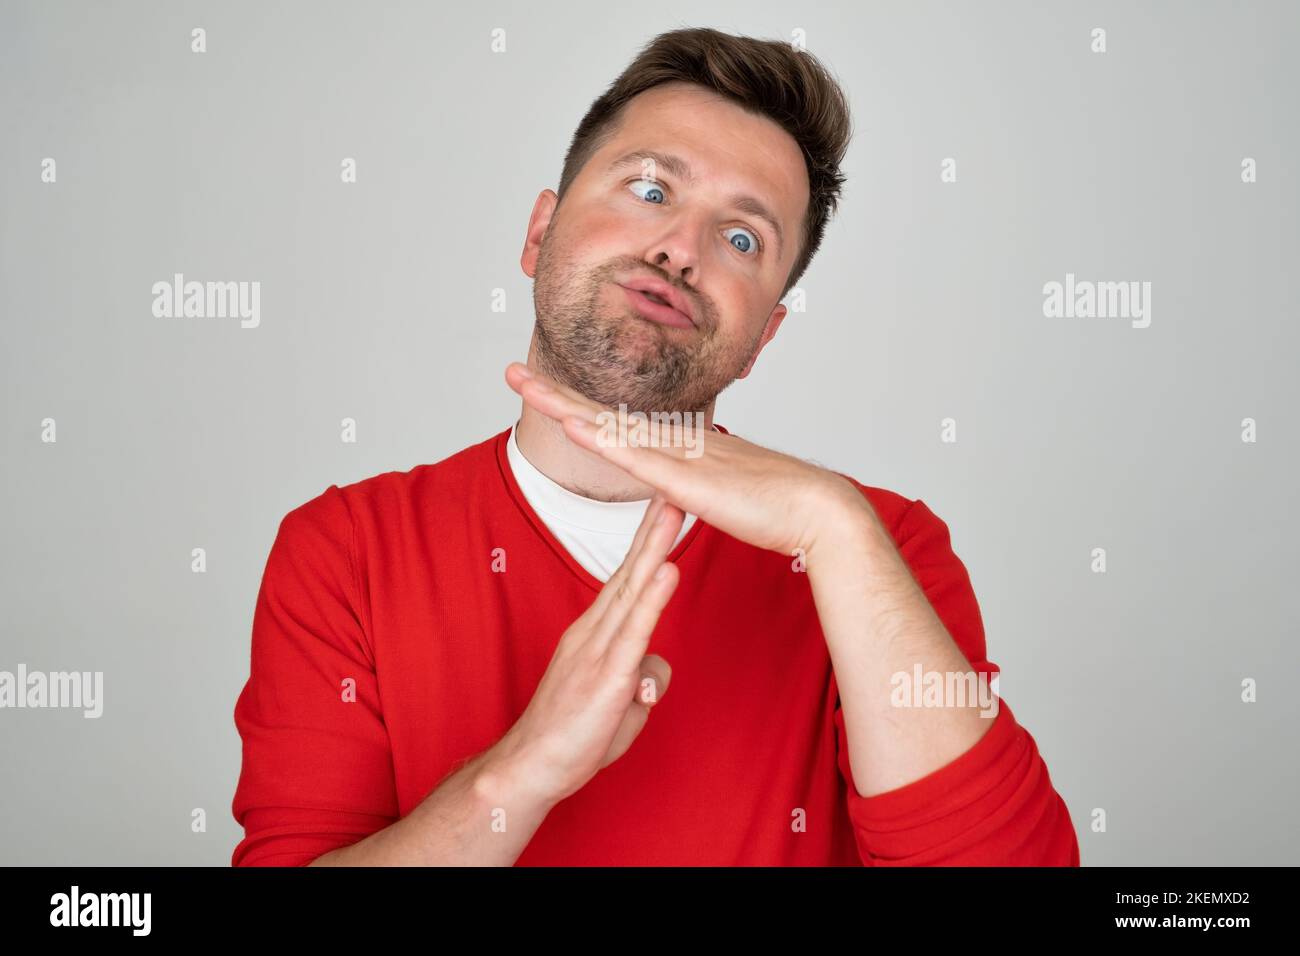 Caucasian mature man showing with hand palm arm r time out sport symbol.  Stock Photo